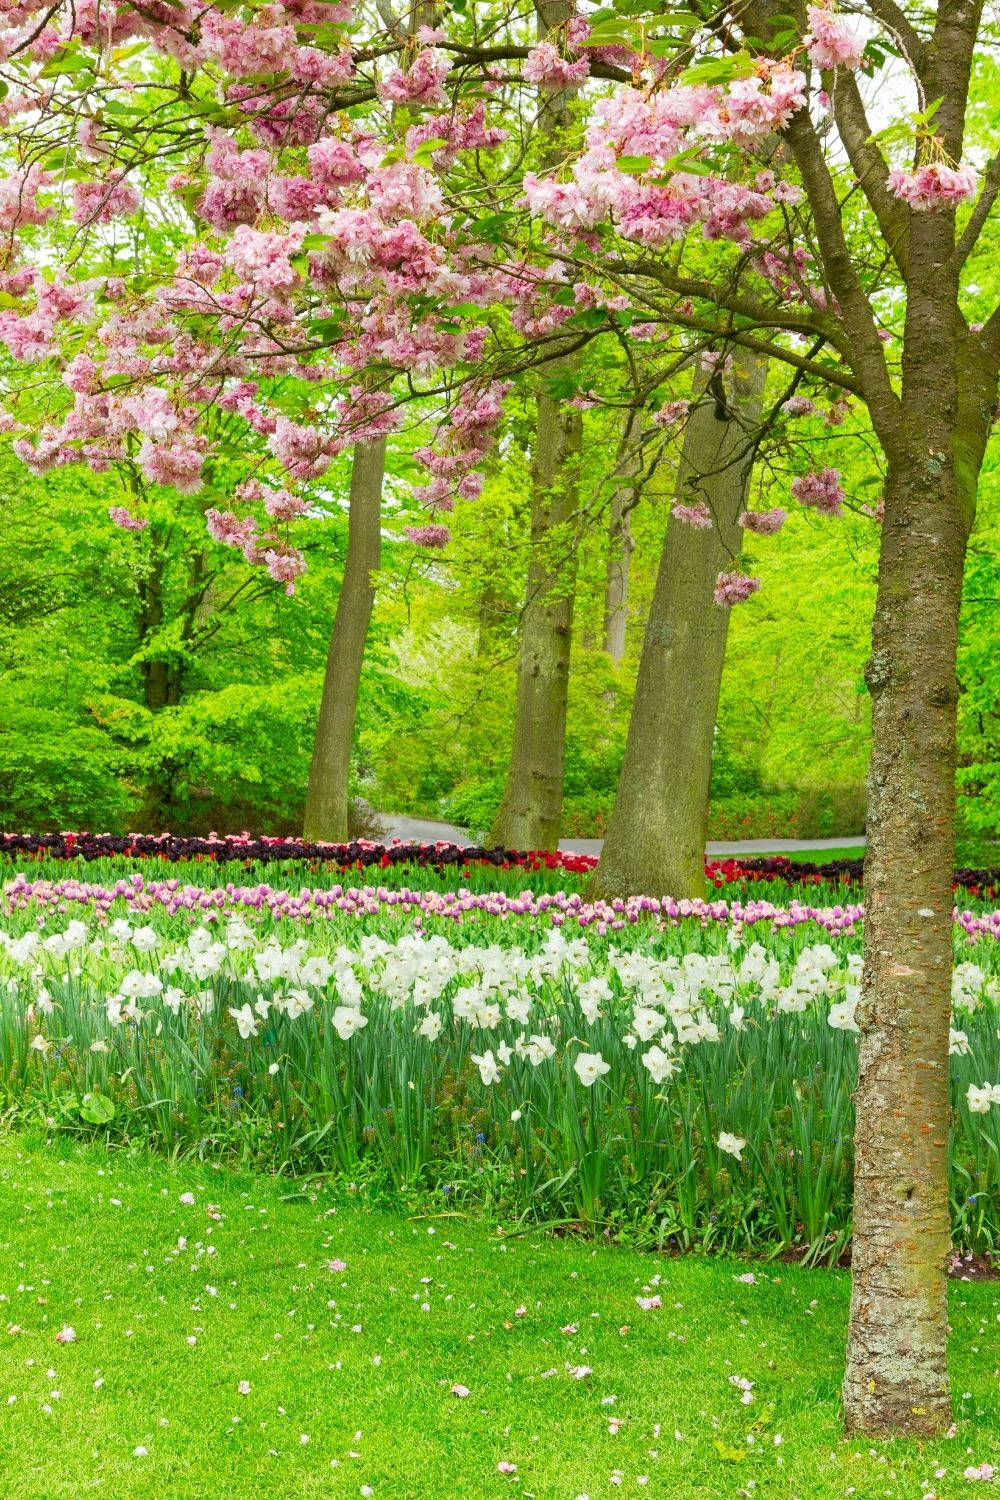 Feel The Blooming Of A Lush Spring Background